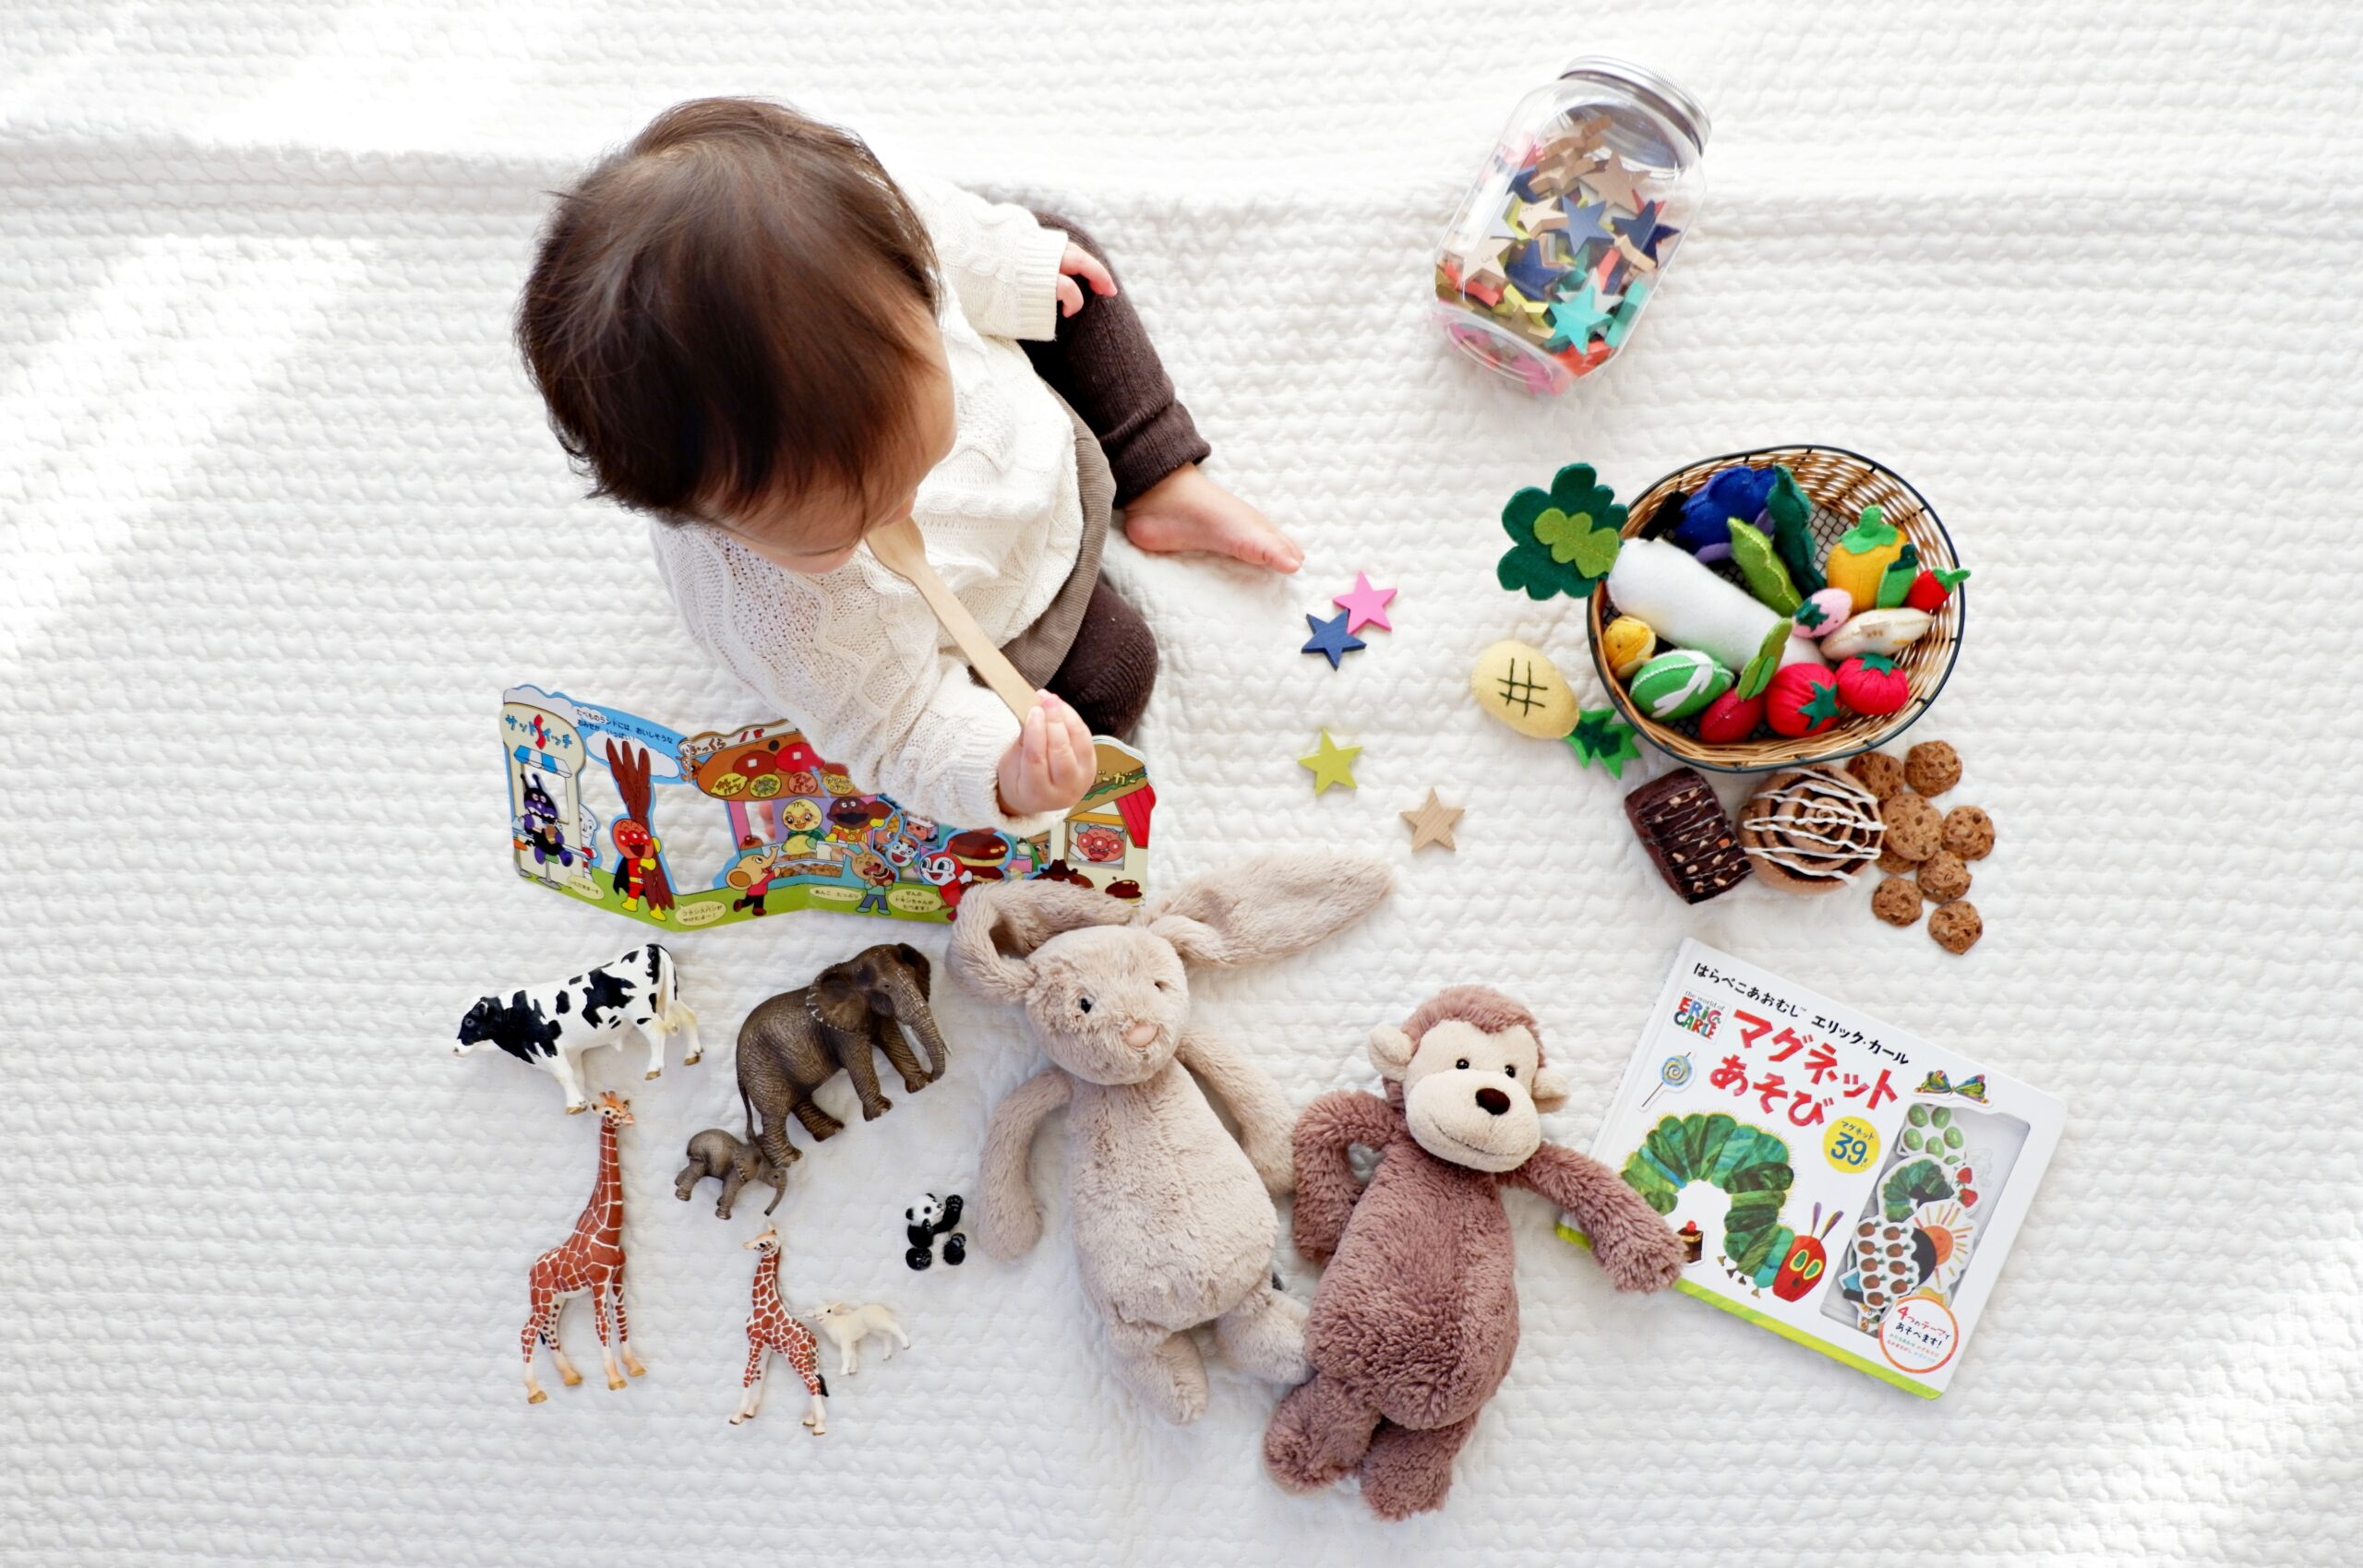 An image showcasing a colorful Montessori toy shelf filled with wooden blocks, puzzles, and sensory materials